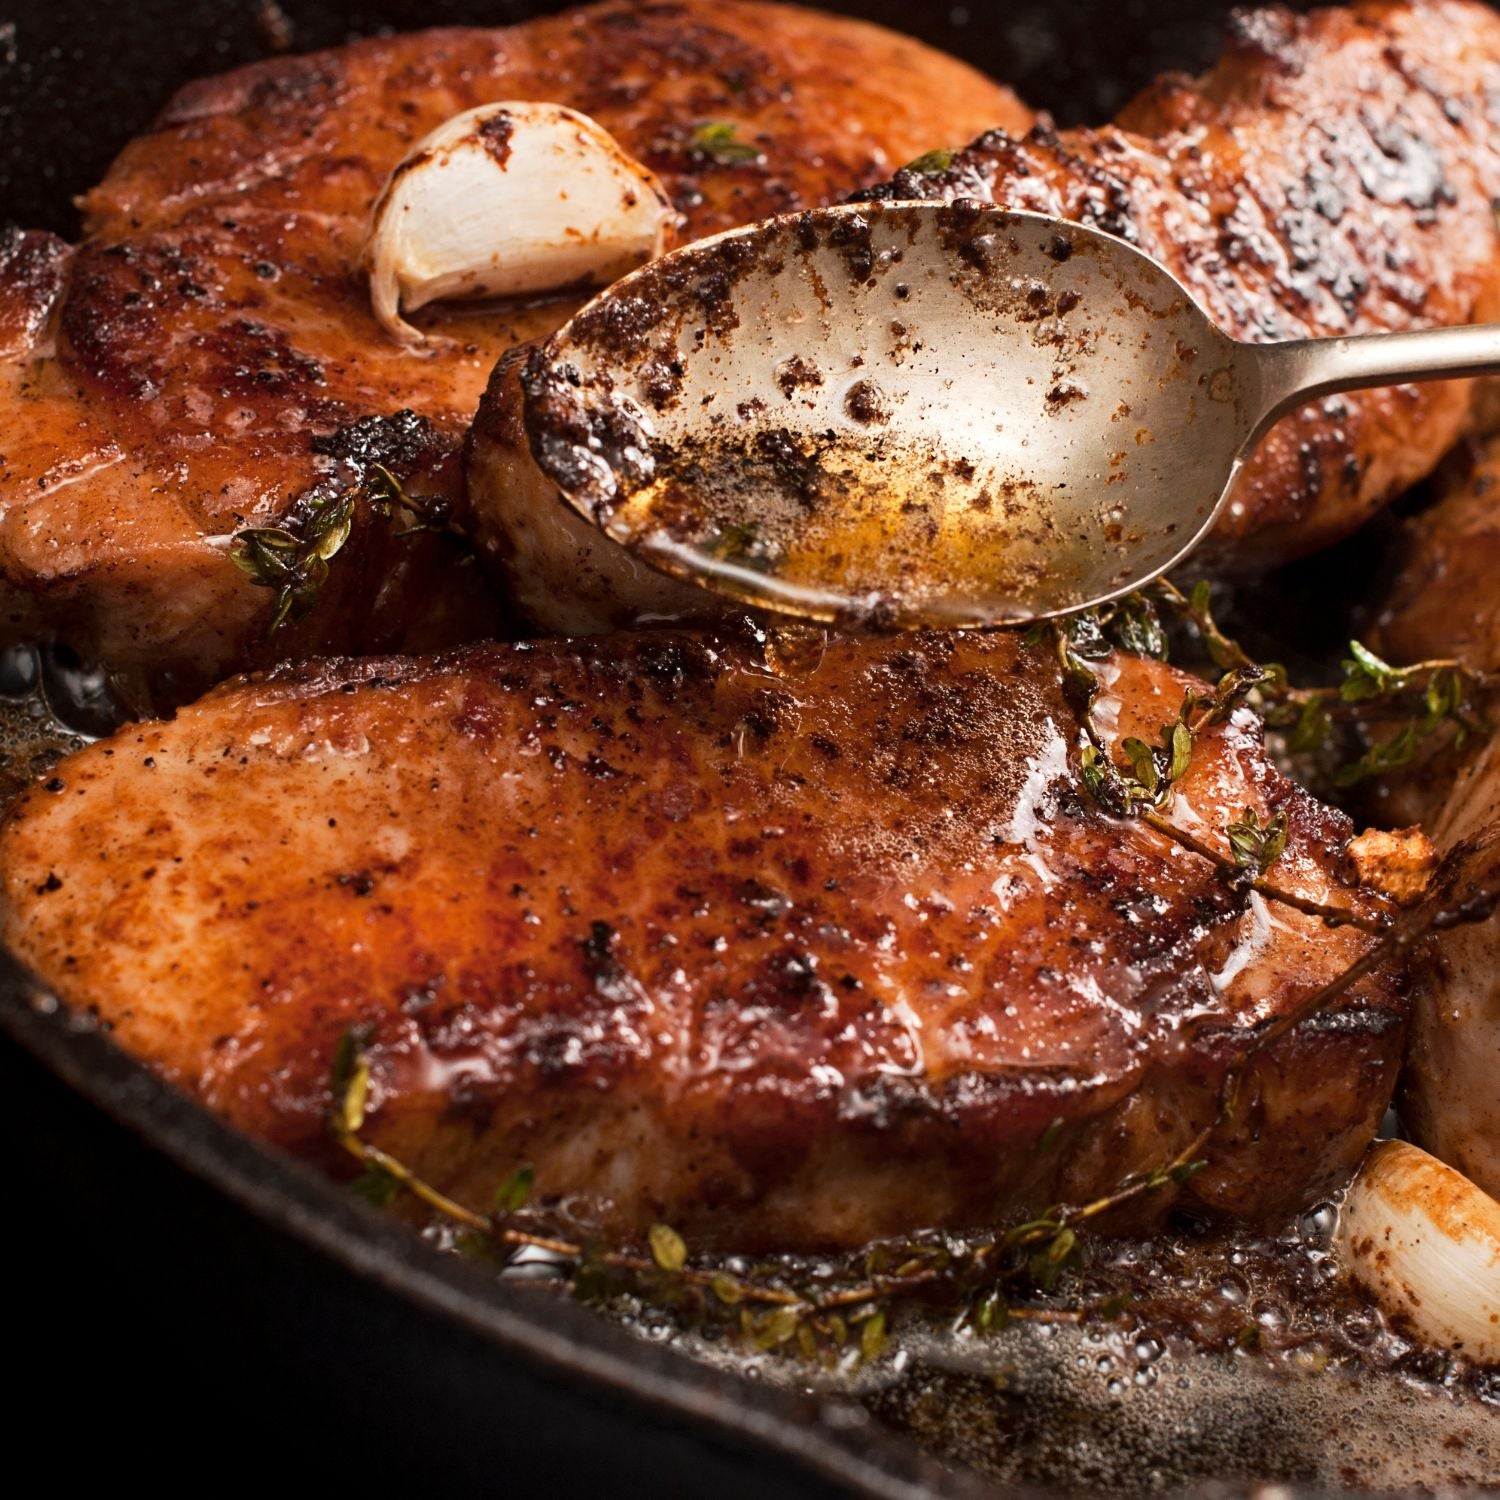 Picture of juicy and delicious pan-fried pork chops with sweet and tangy apple chutney